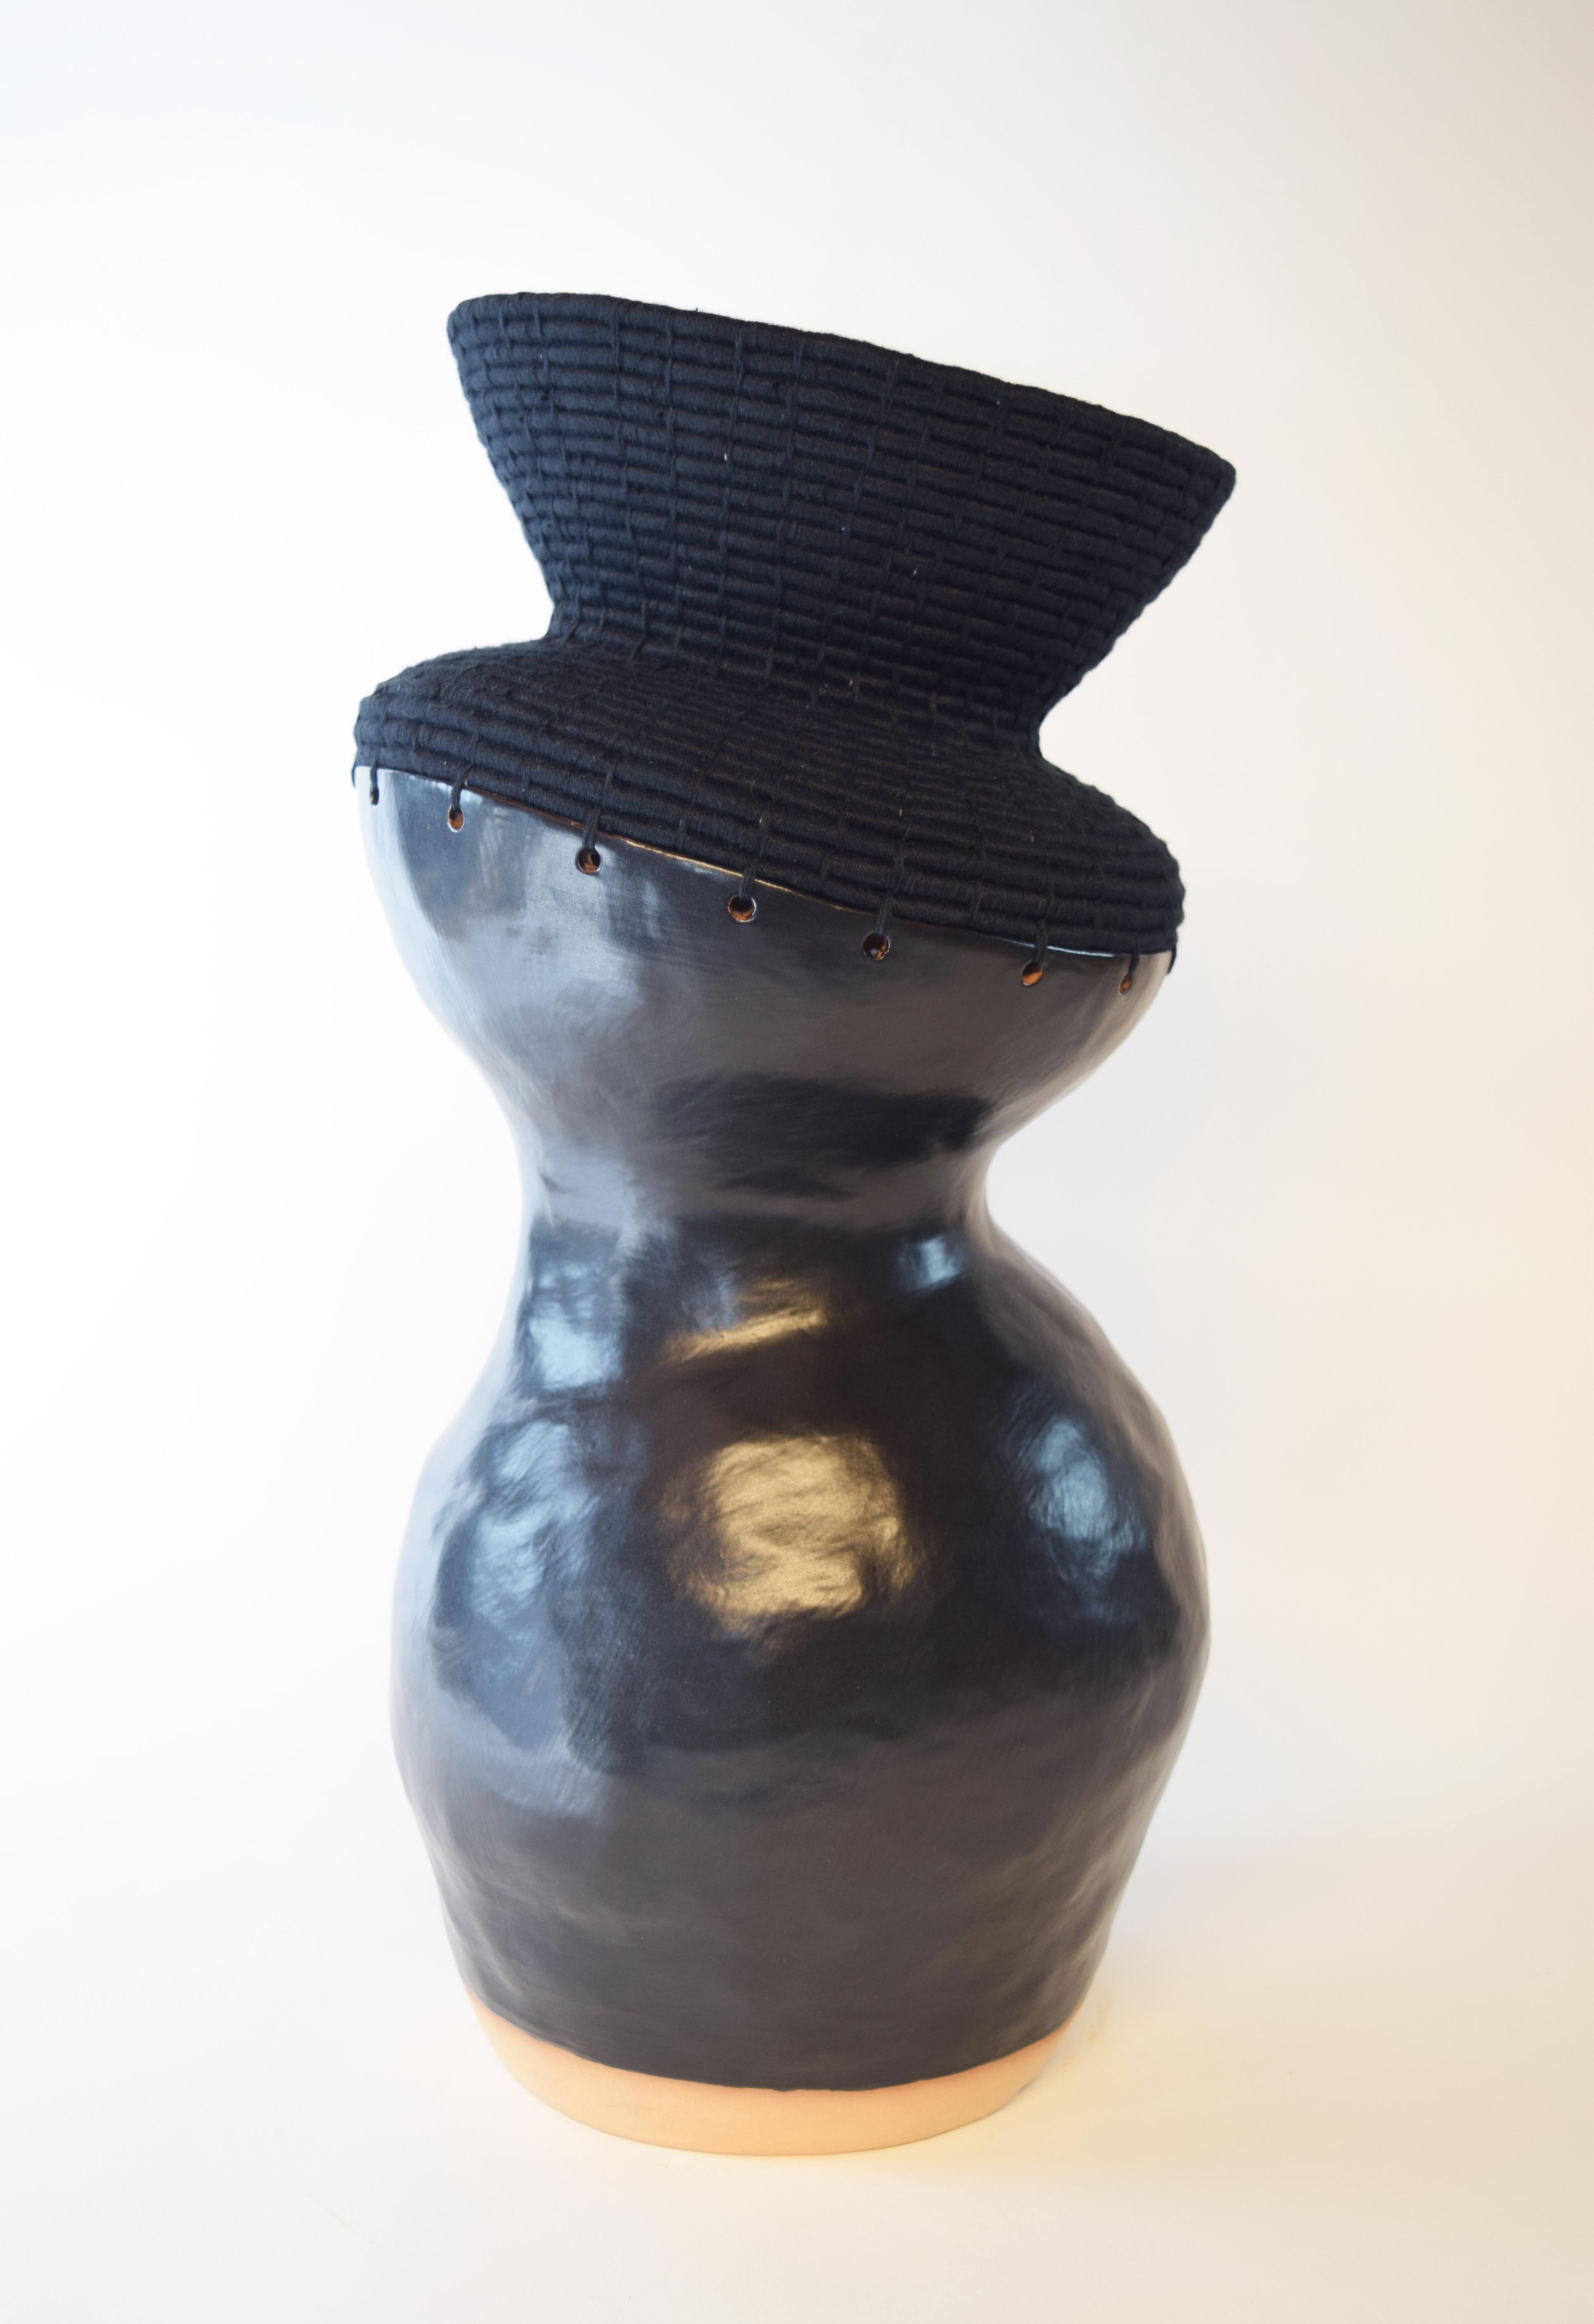 761 Black vessel by Karen Gayle Tinney
Dimensions: D 20.5 x W 20.5 x H 46.5 cm 
Material: Stoneware with cream, shino glaze, Black cotton.

Karen Gayle Tinney is an artist and designer whose work consists of pieces that combine ceramic and